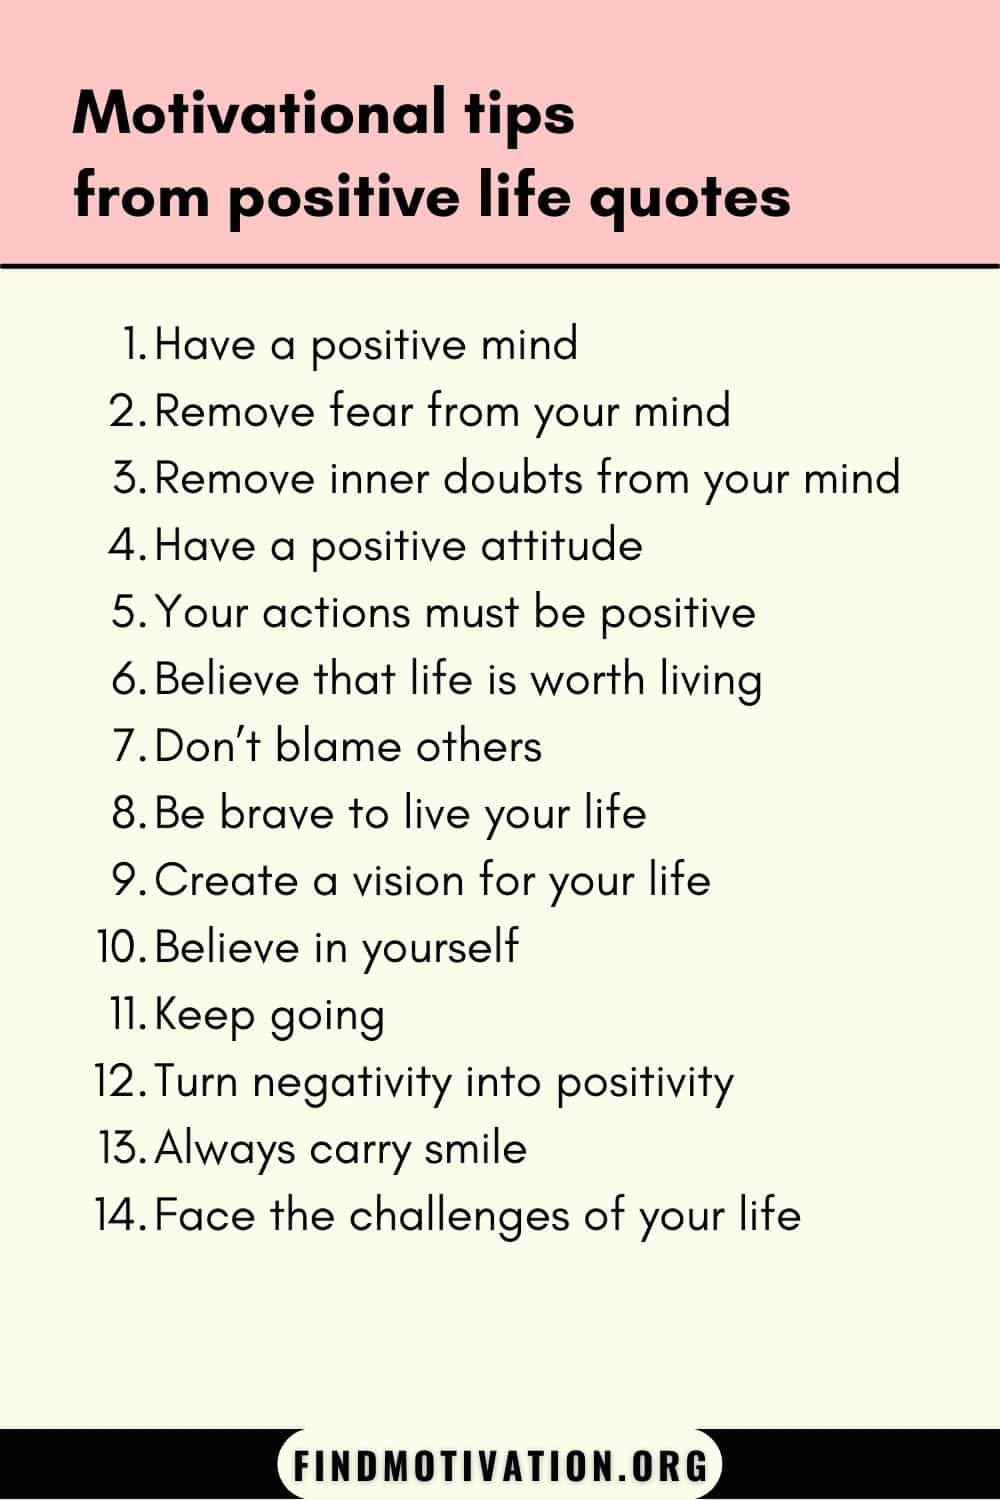 positive life quotes to live a happy life by removing the negative thinking from the mind